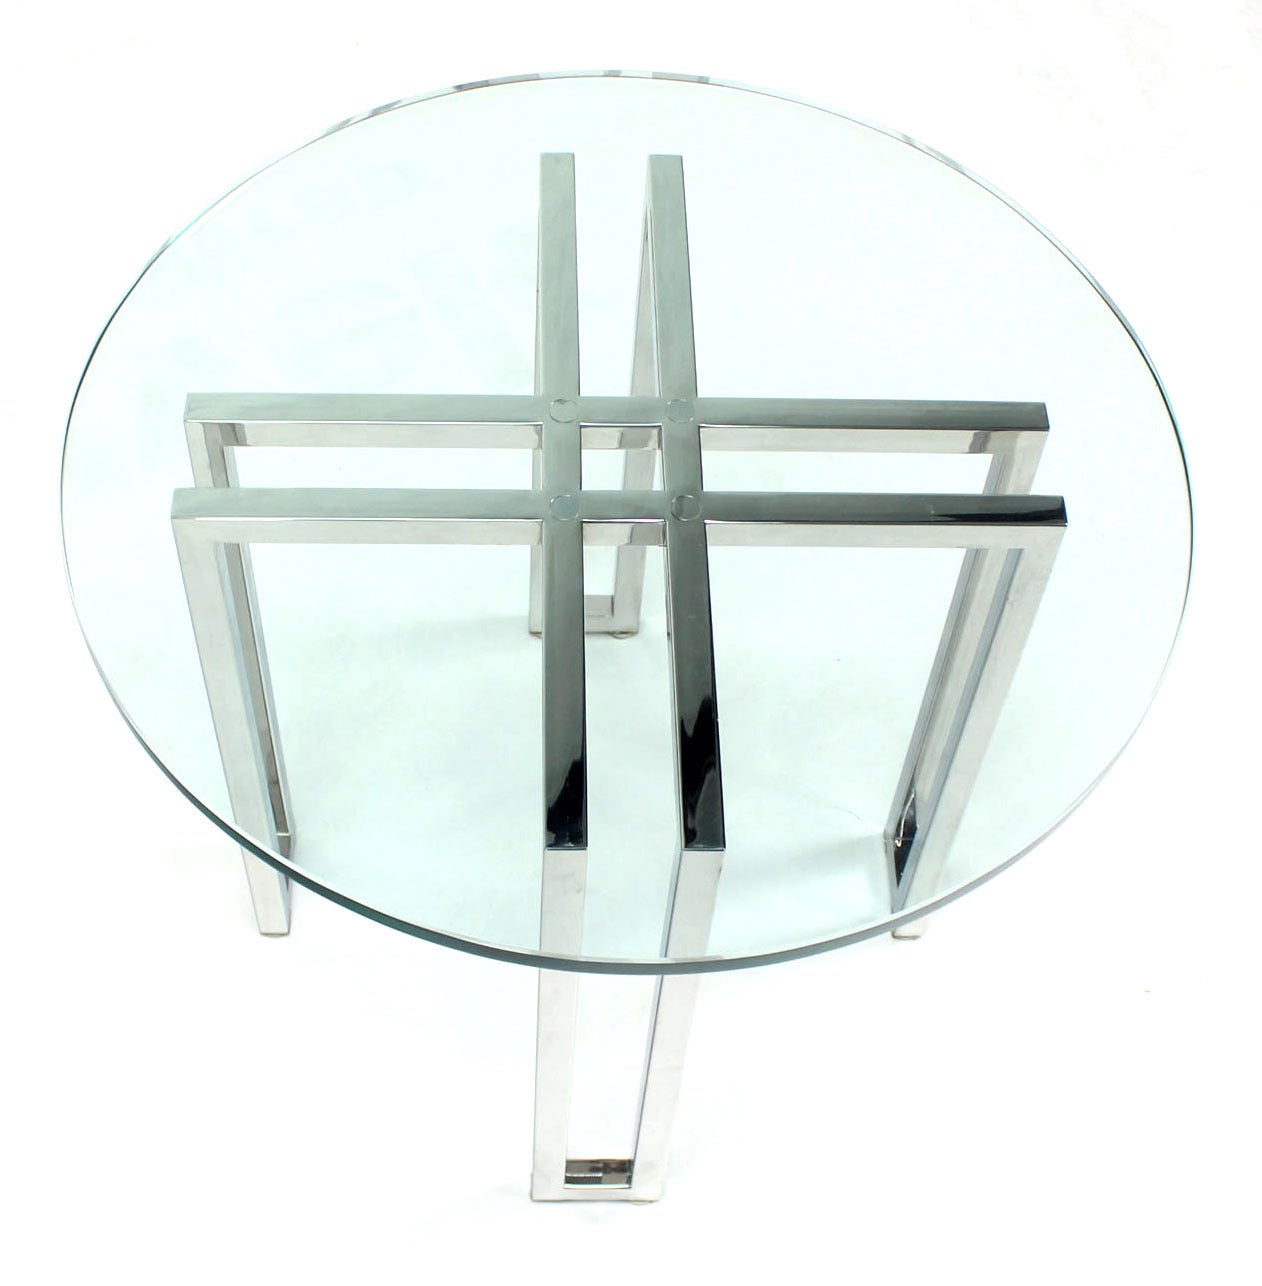 Mid-Century Modern Round Chrome Base and Glass-Top Side Table